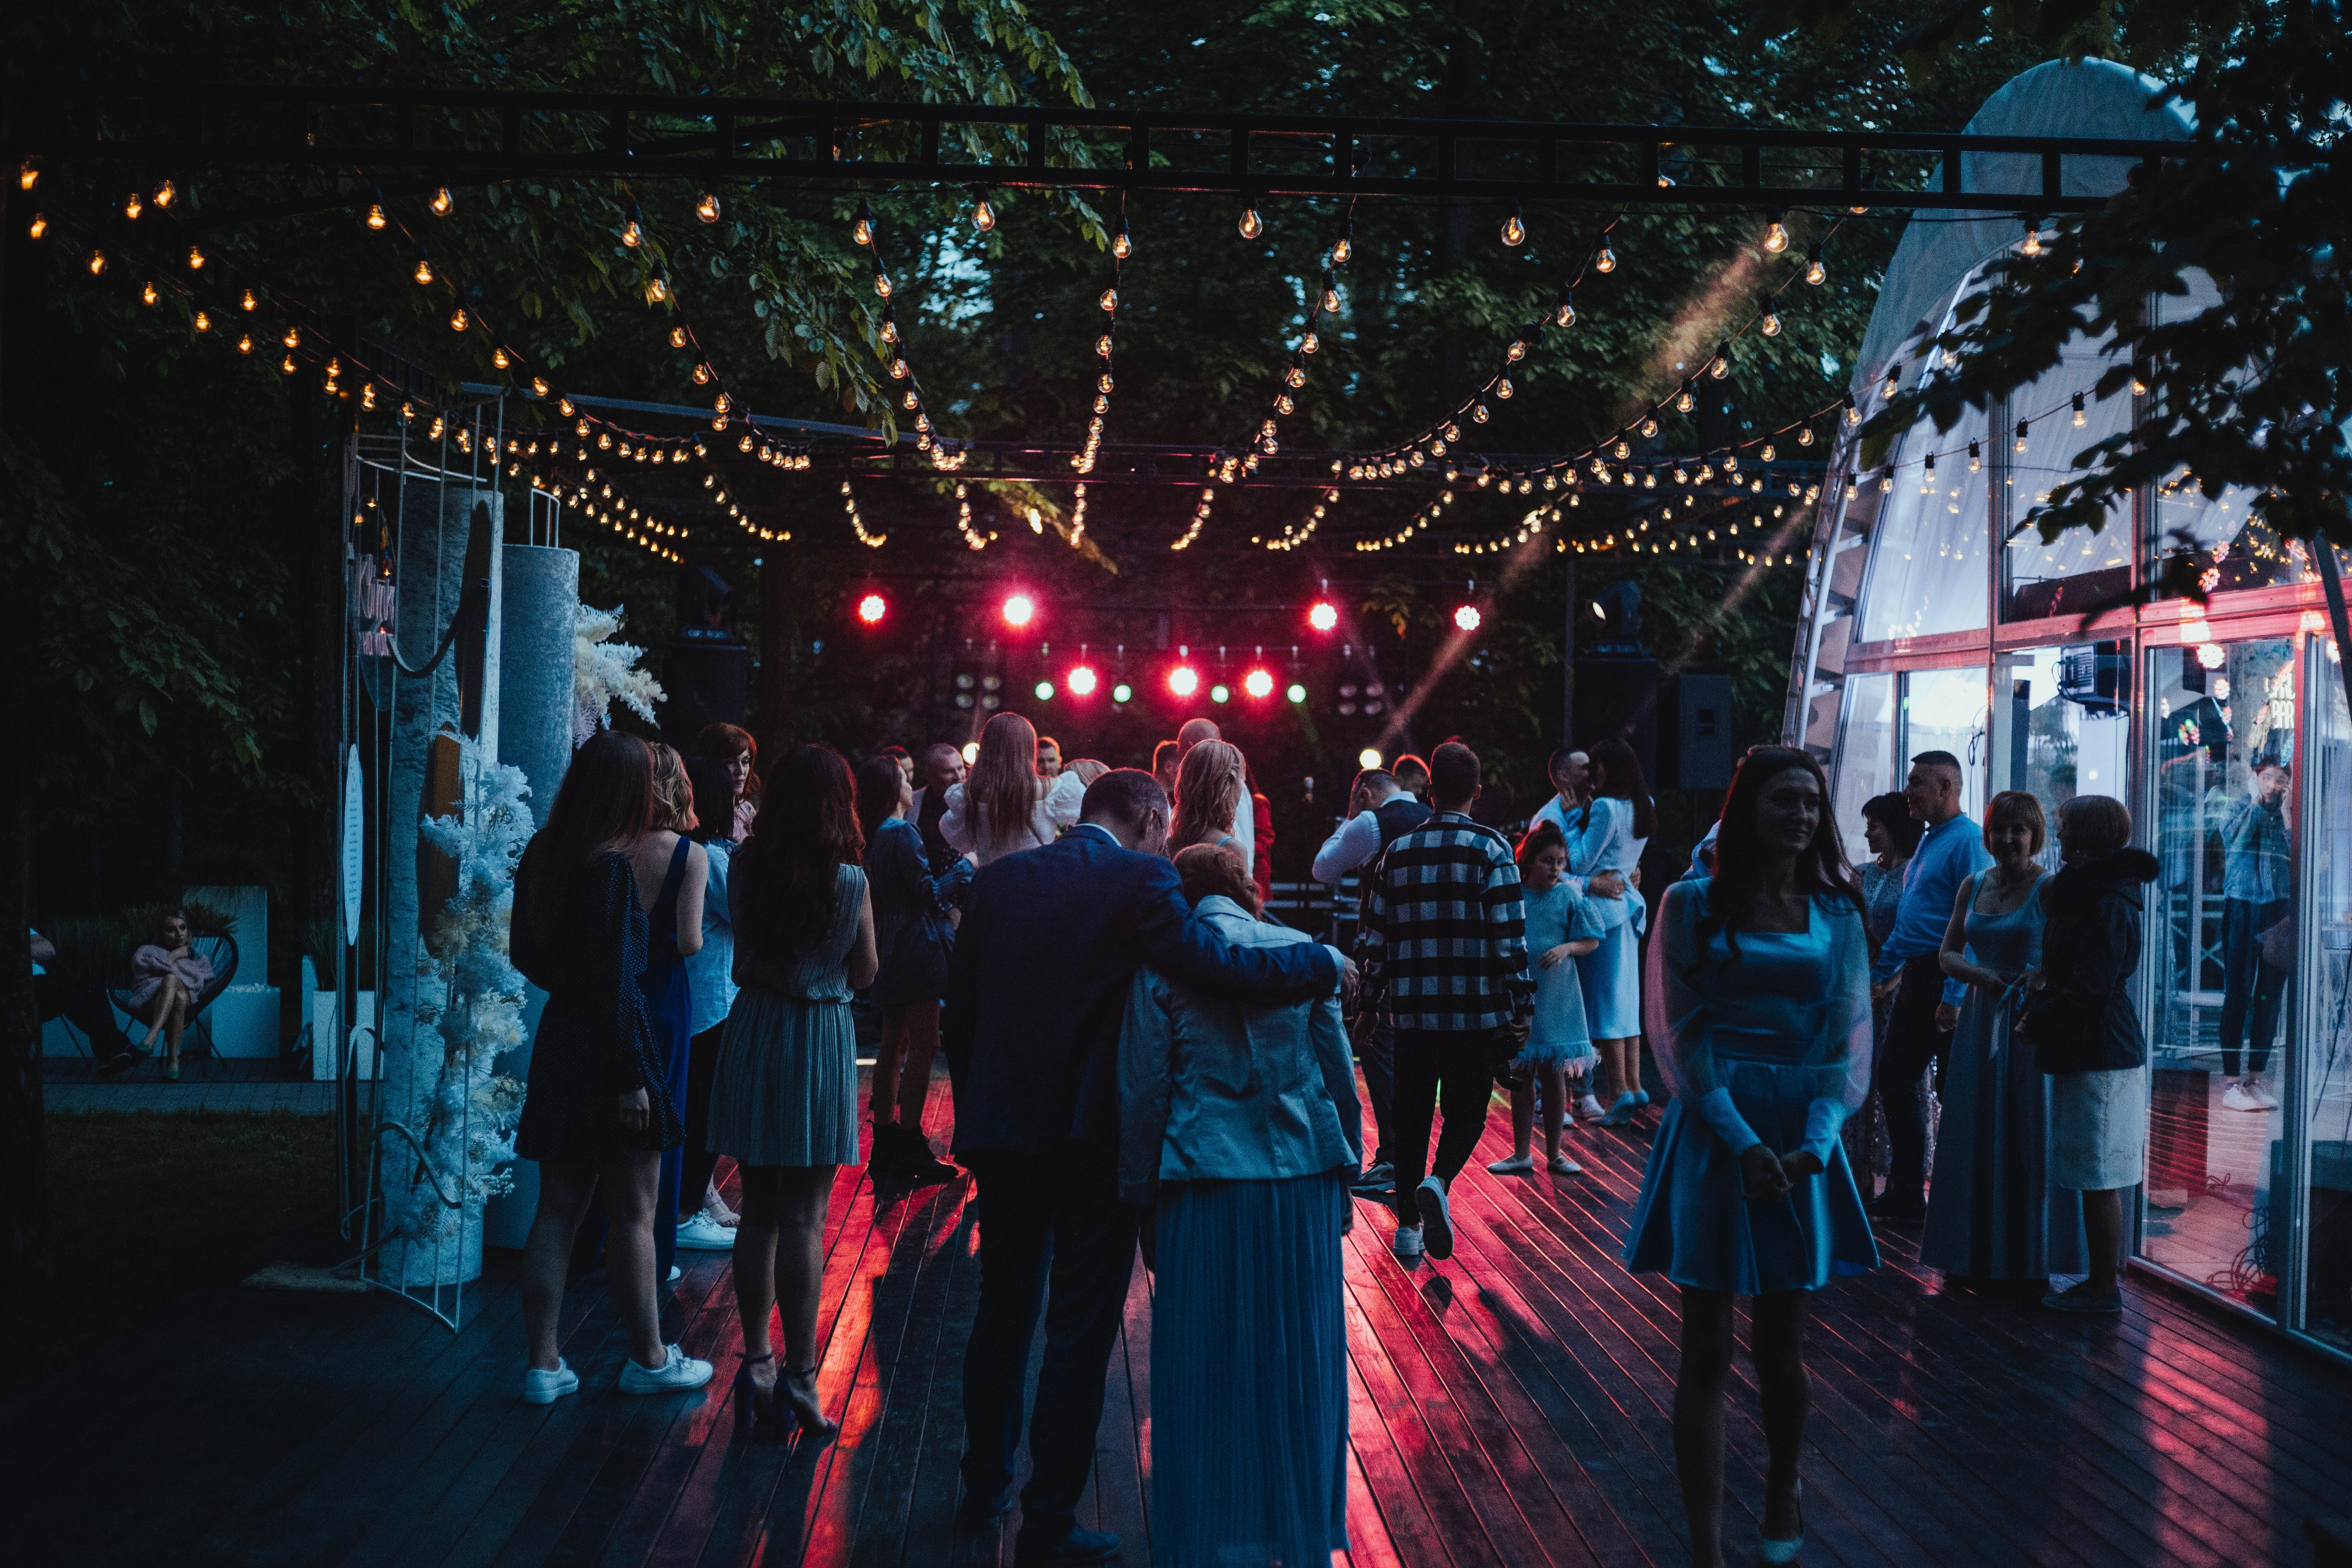 Jake threw a lavish party to celebrate a recent achievement in his business. | Source: Unsplash